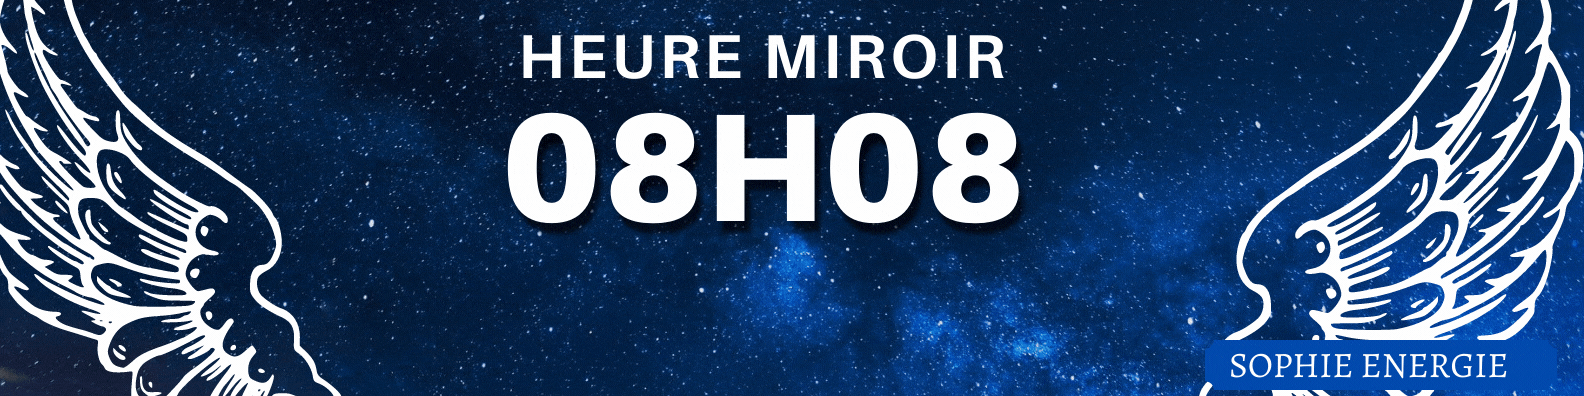 HEURE MIROIR anges 08h08